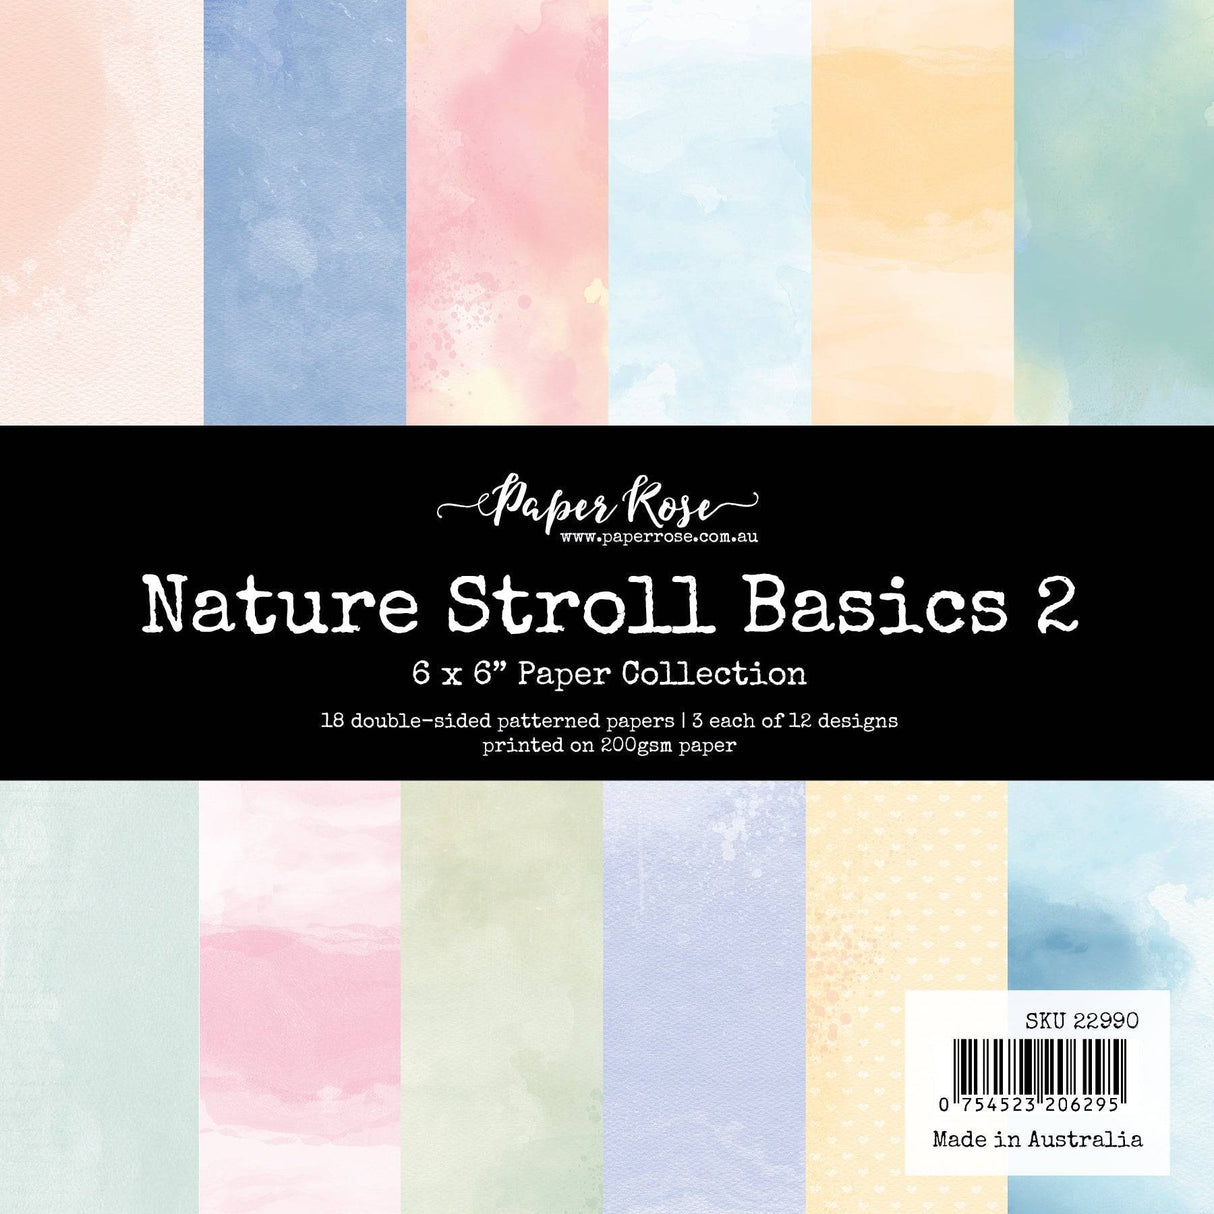 Nature Stroll Basics 2.0 6x6 Paper Collection 22990 - Paper Rose Studio